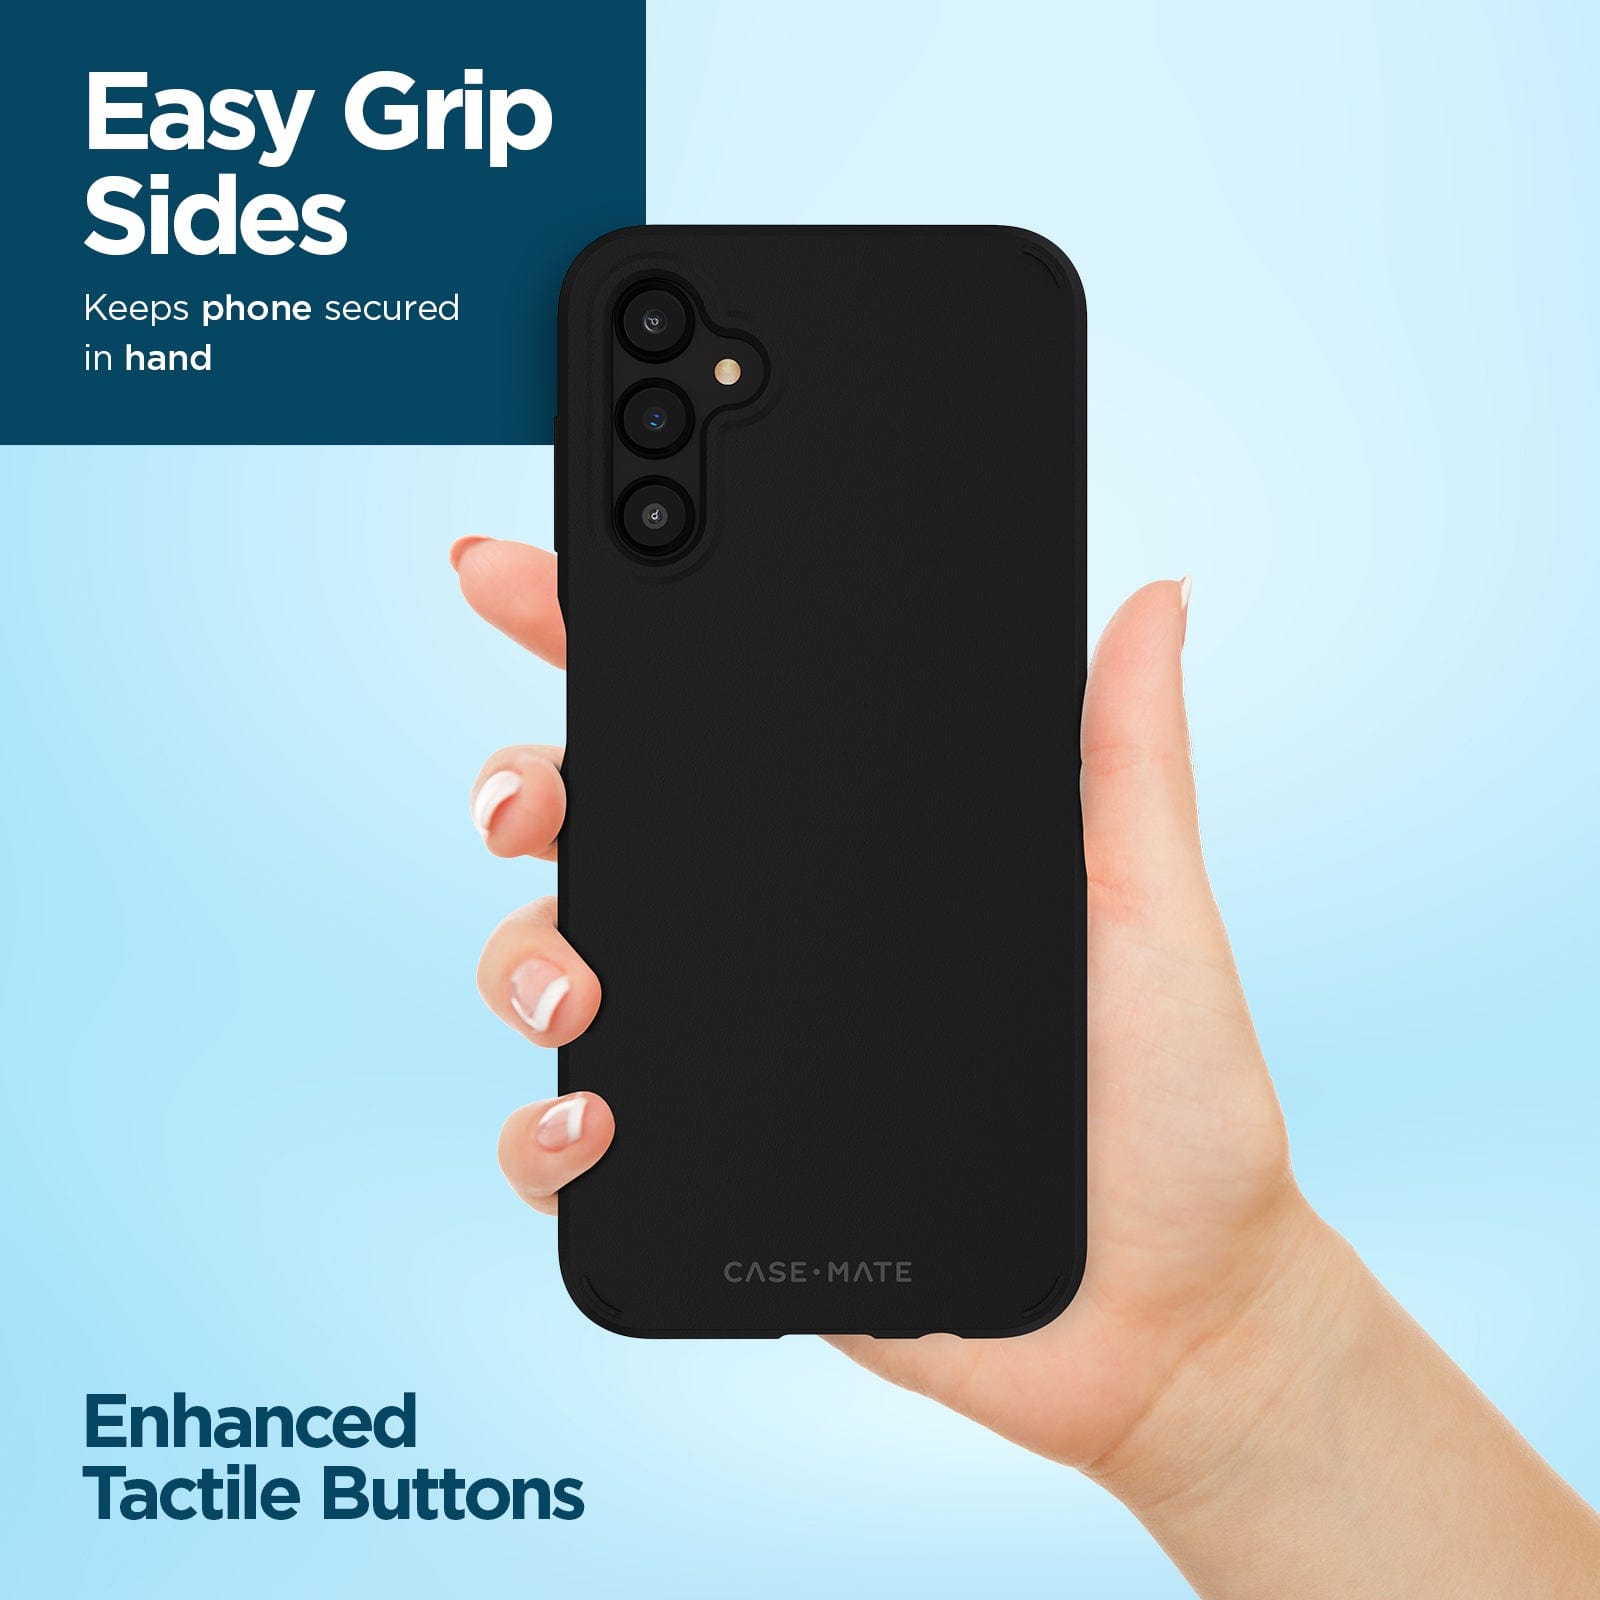 EASY GRIP SIDES KEEPS PHONE SECURED IN HAND. EHANCED TACTILE BUTTONS 